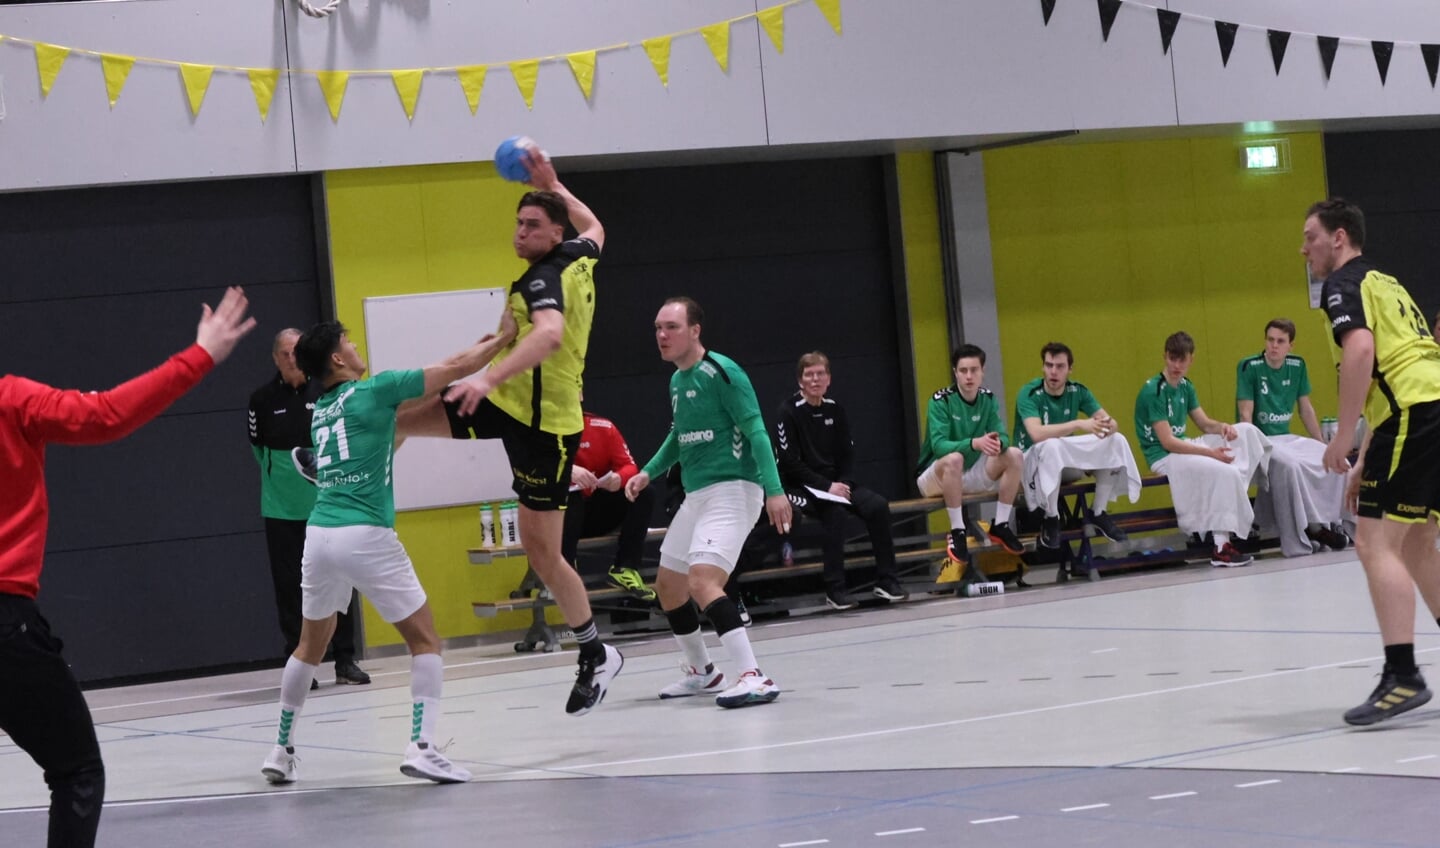 The Dome/Handbal Houten - oosting E&O/Hurry Up HS1